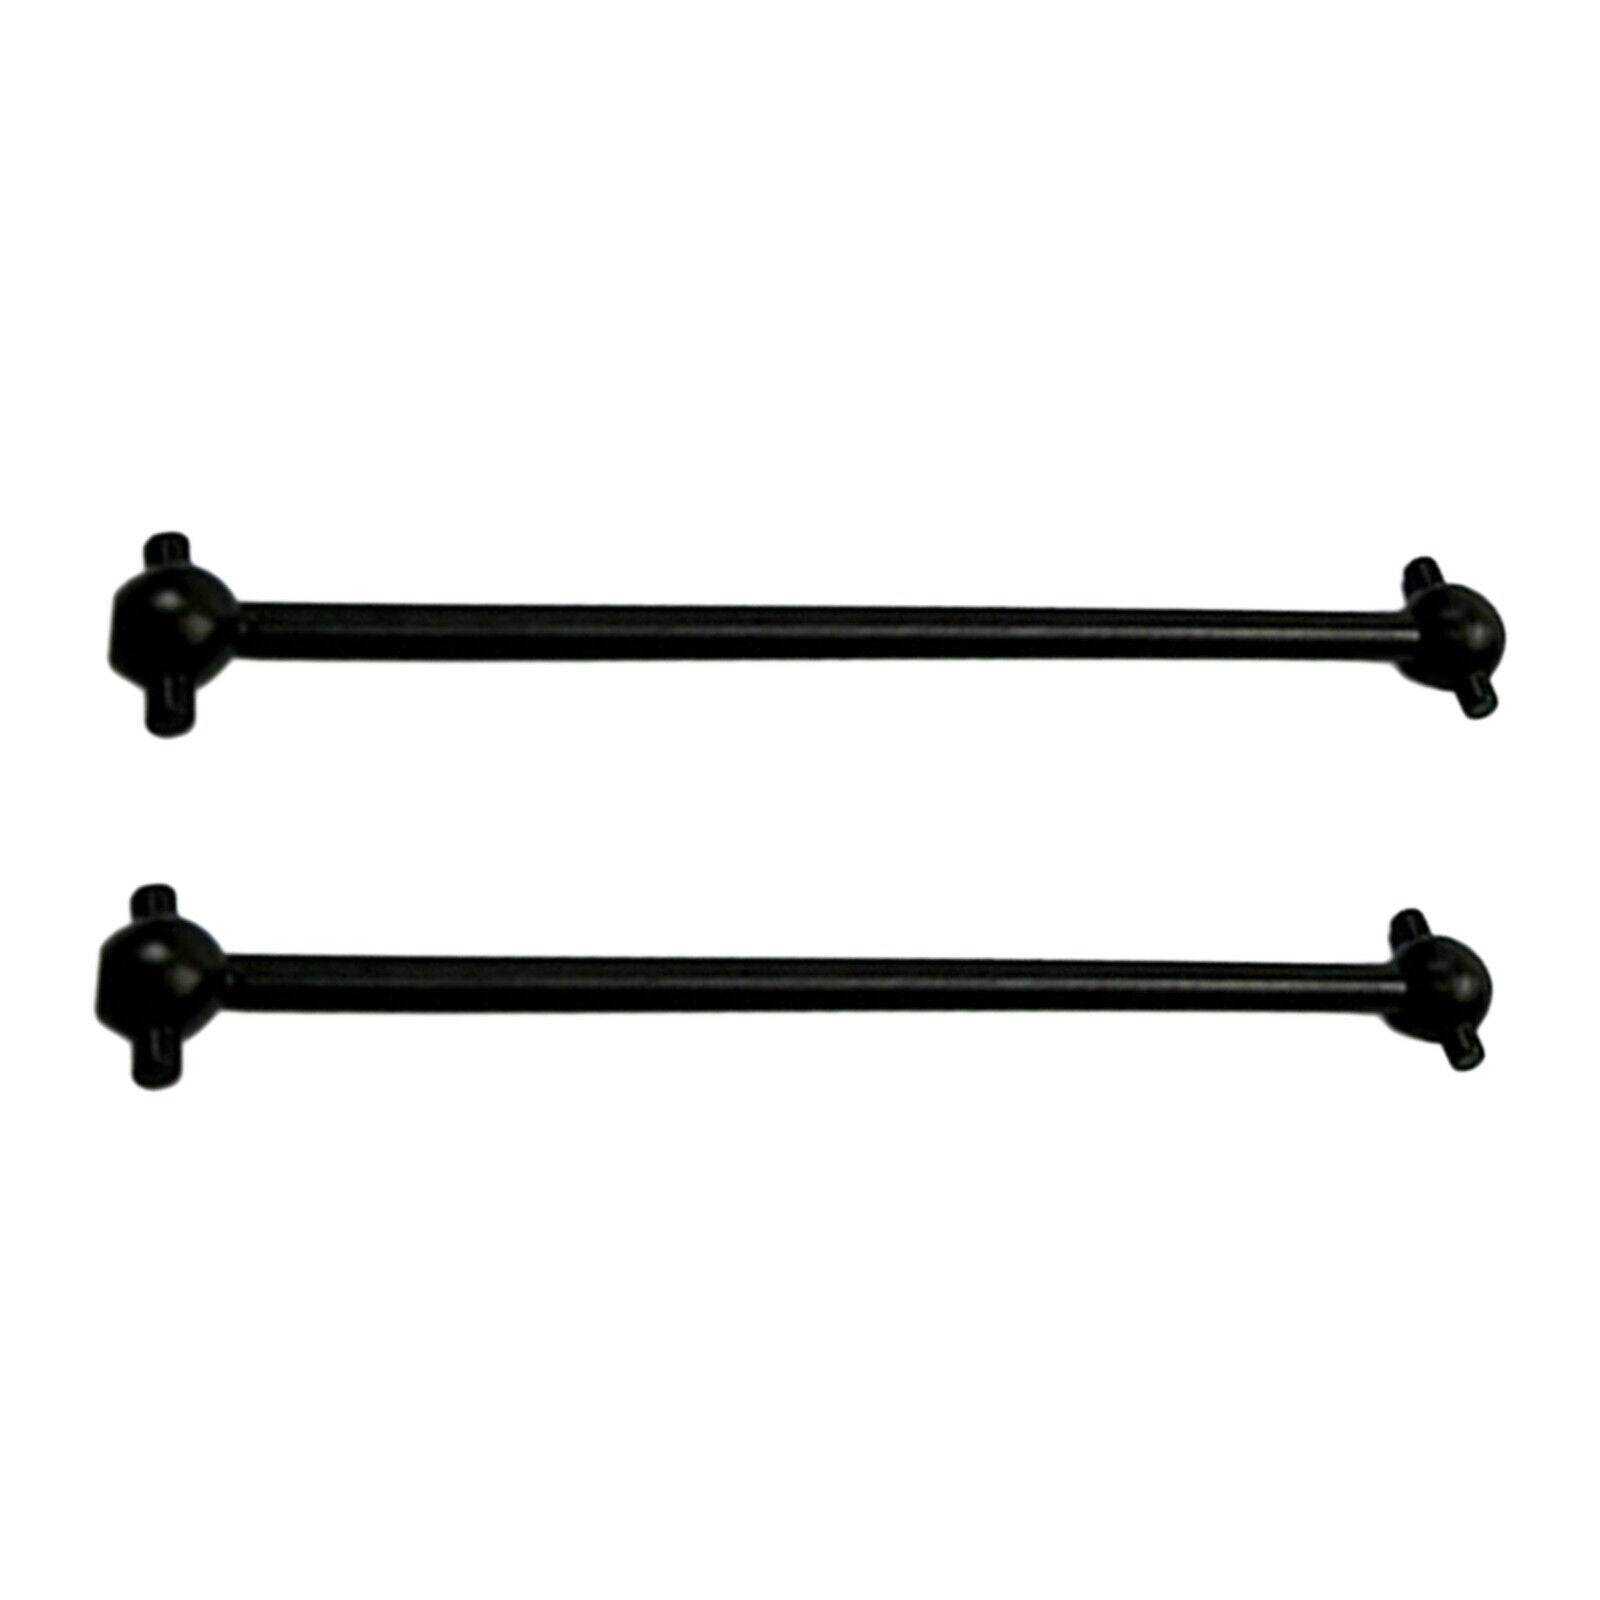 Metal Dogbone Rear Drive Shafts Replacement for WLtoys 144001 RC Buggy Drift